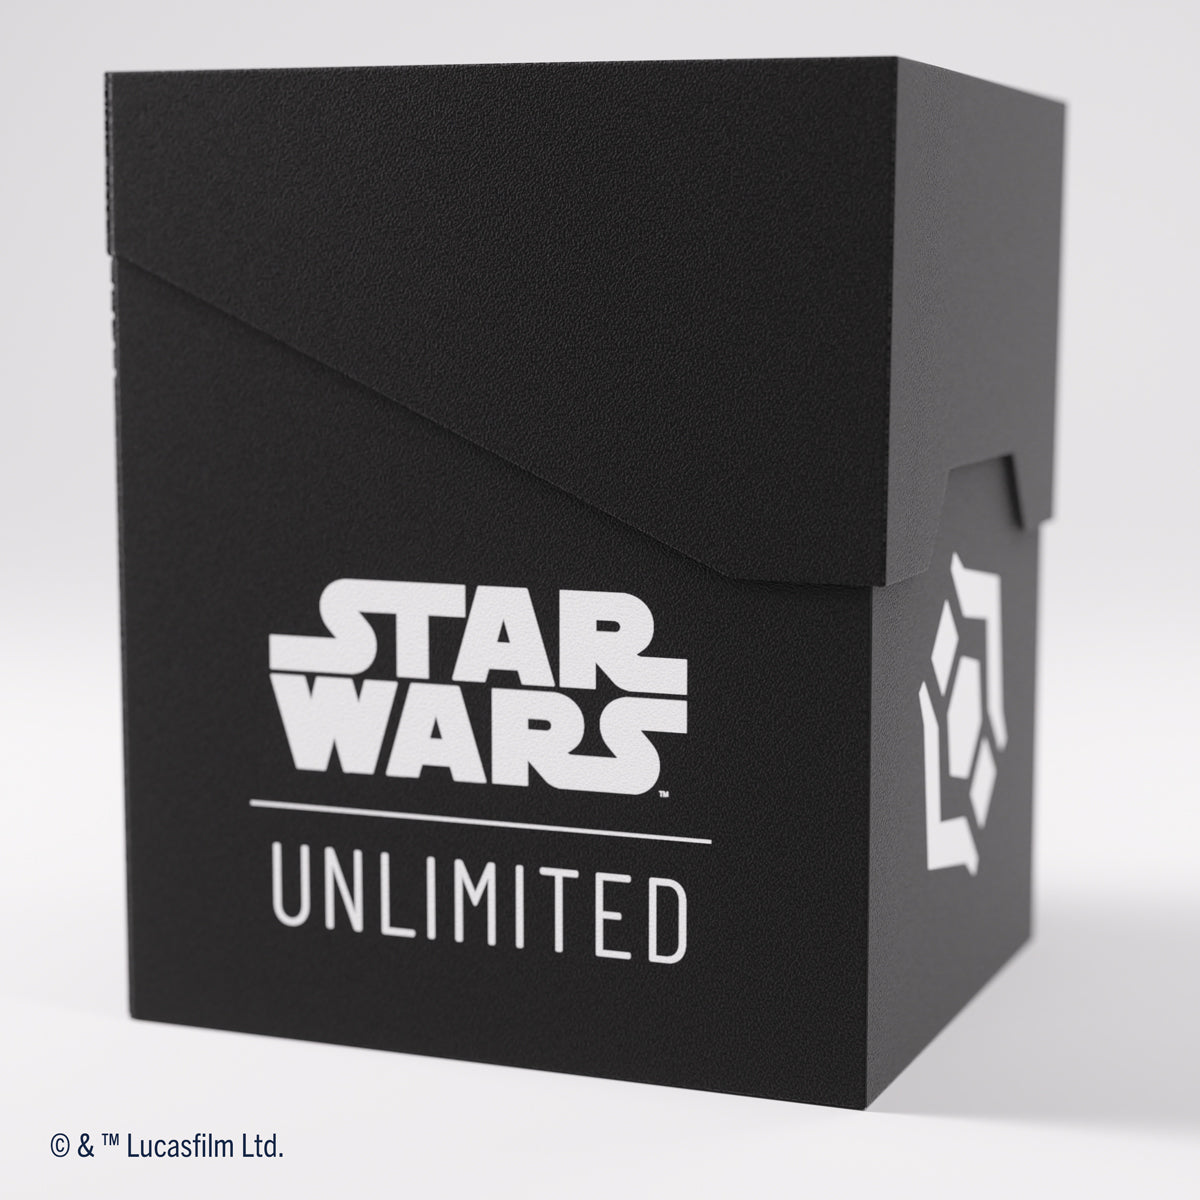 Gamegenic Star Wars: Unlimited Soft Crate Deck Box - Black / White